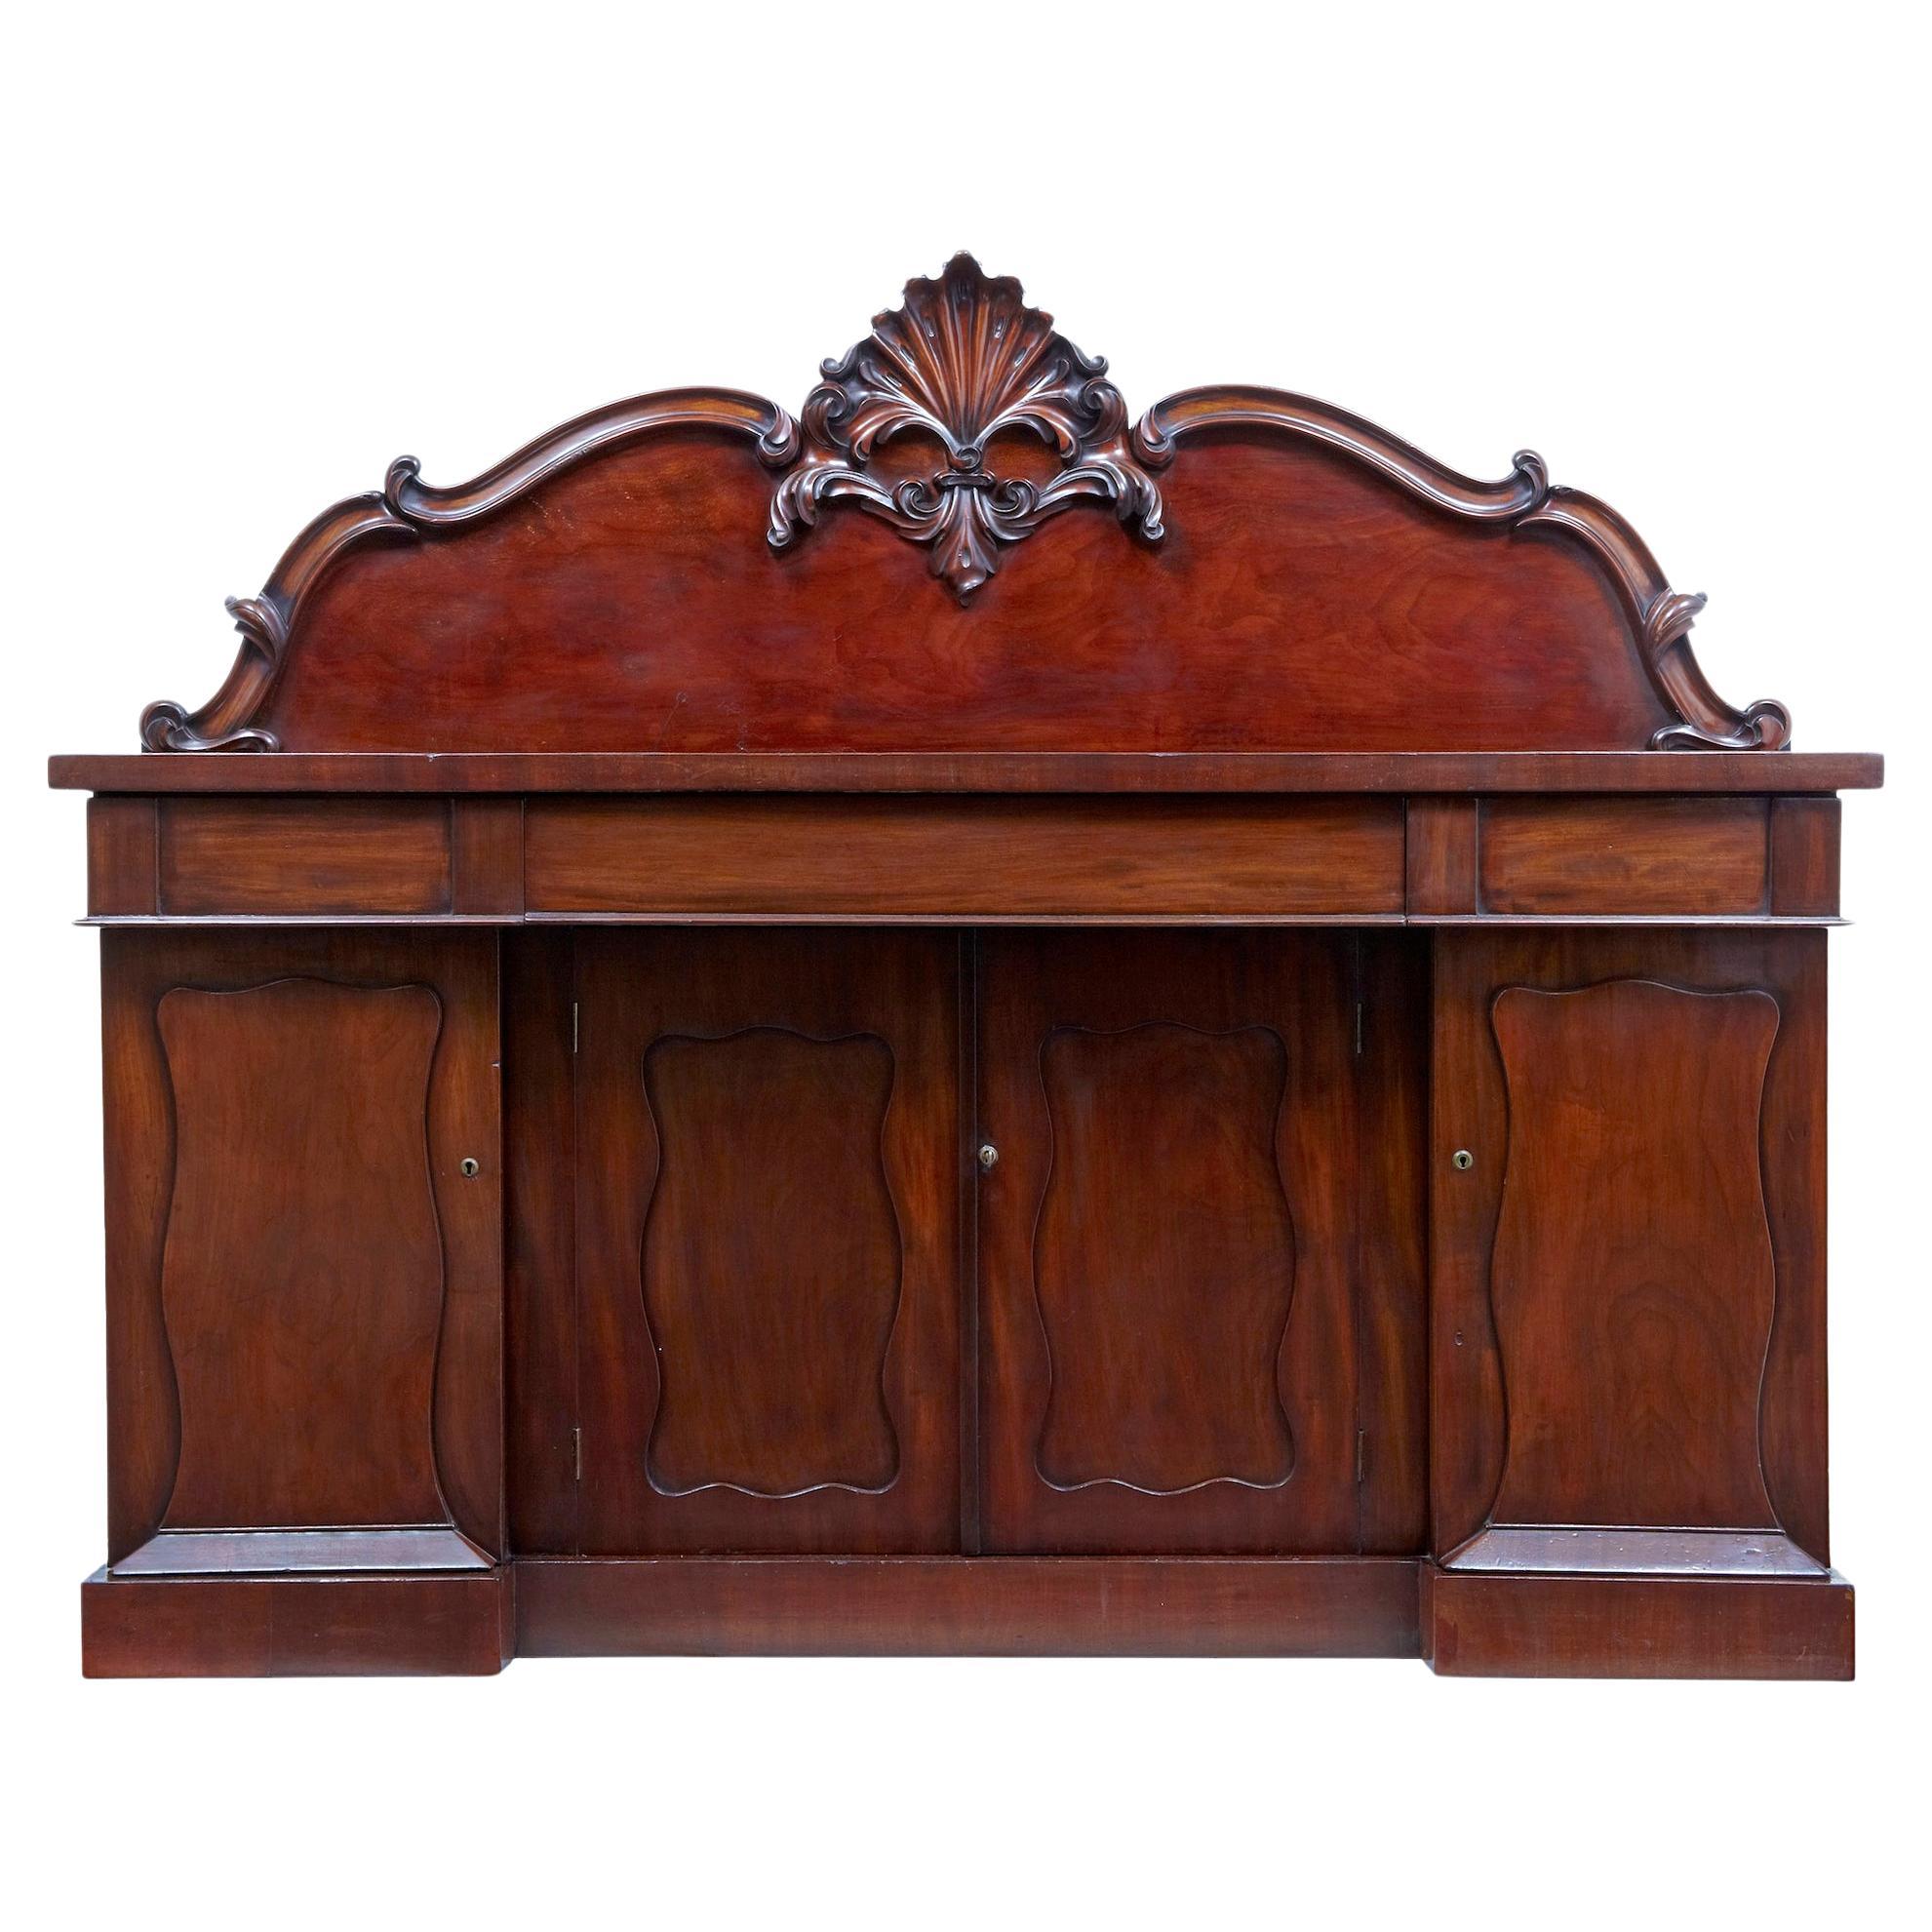 19th century William IV carved mahogany sideboard